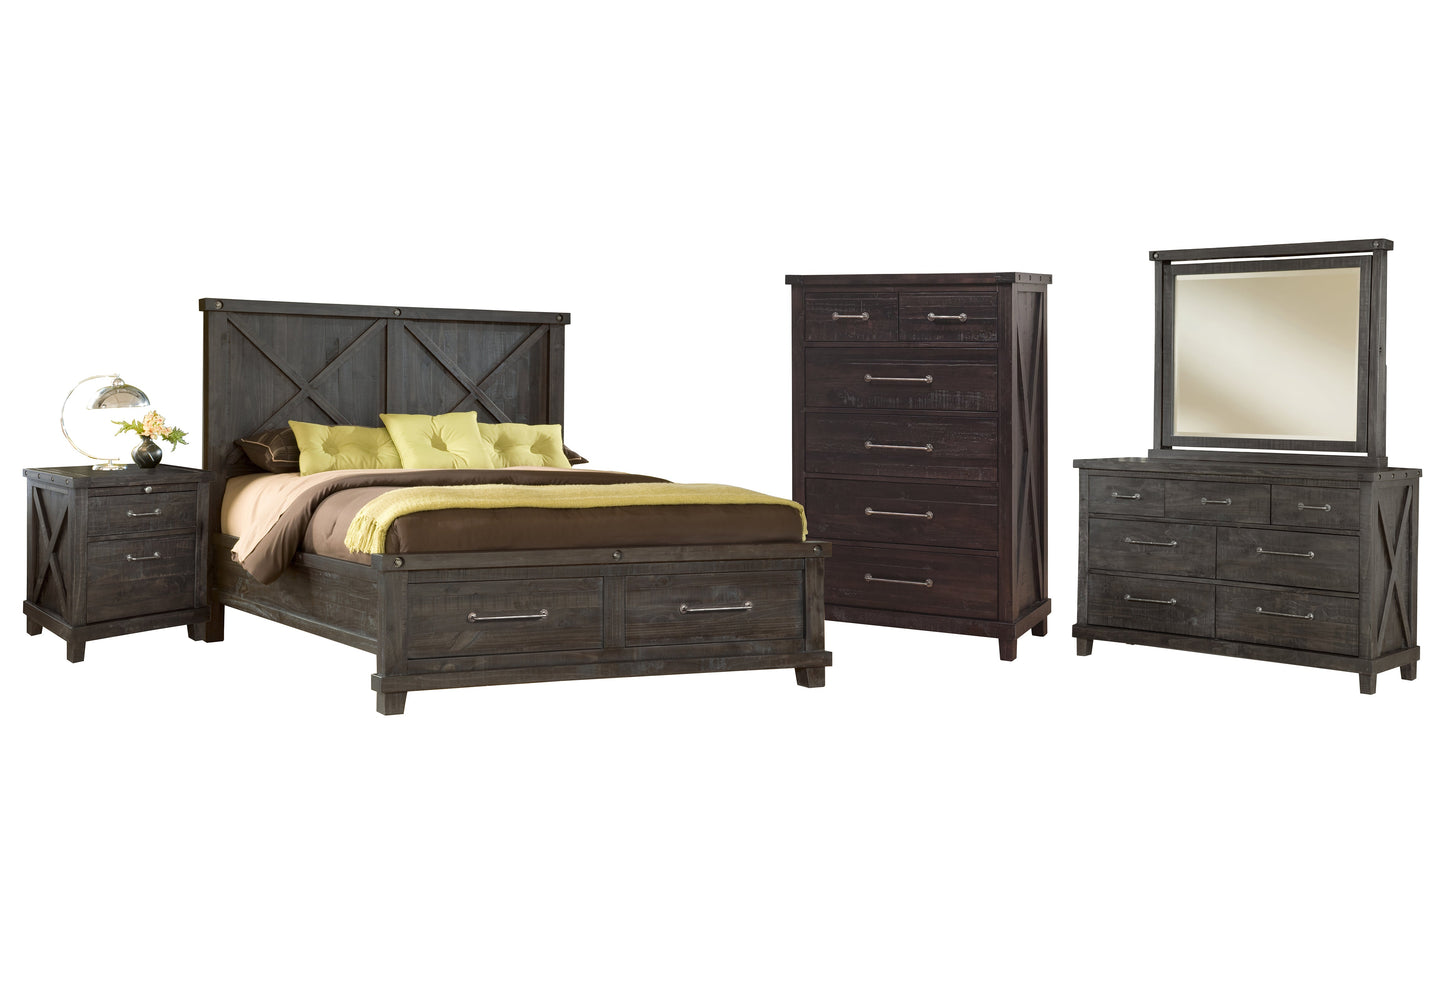 Modus Yosemite 5PC Full Storage Bedroom Set w Chest in Cafe